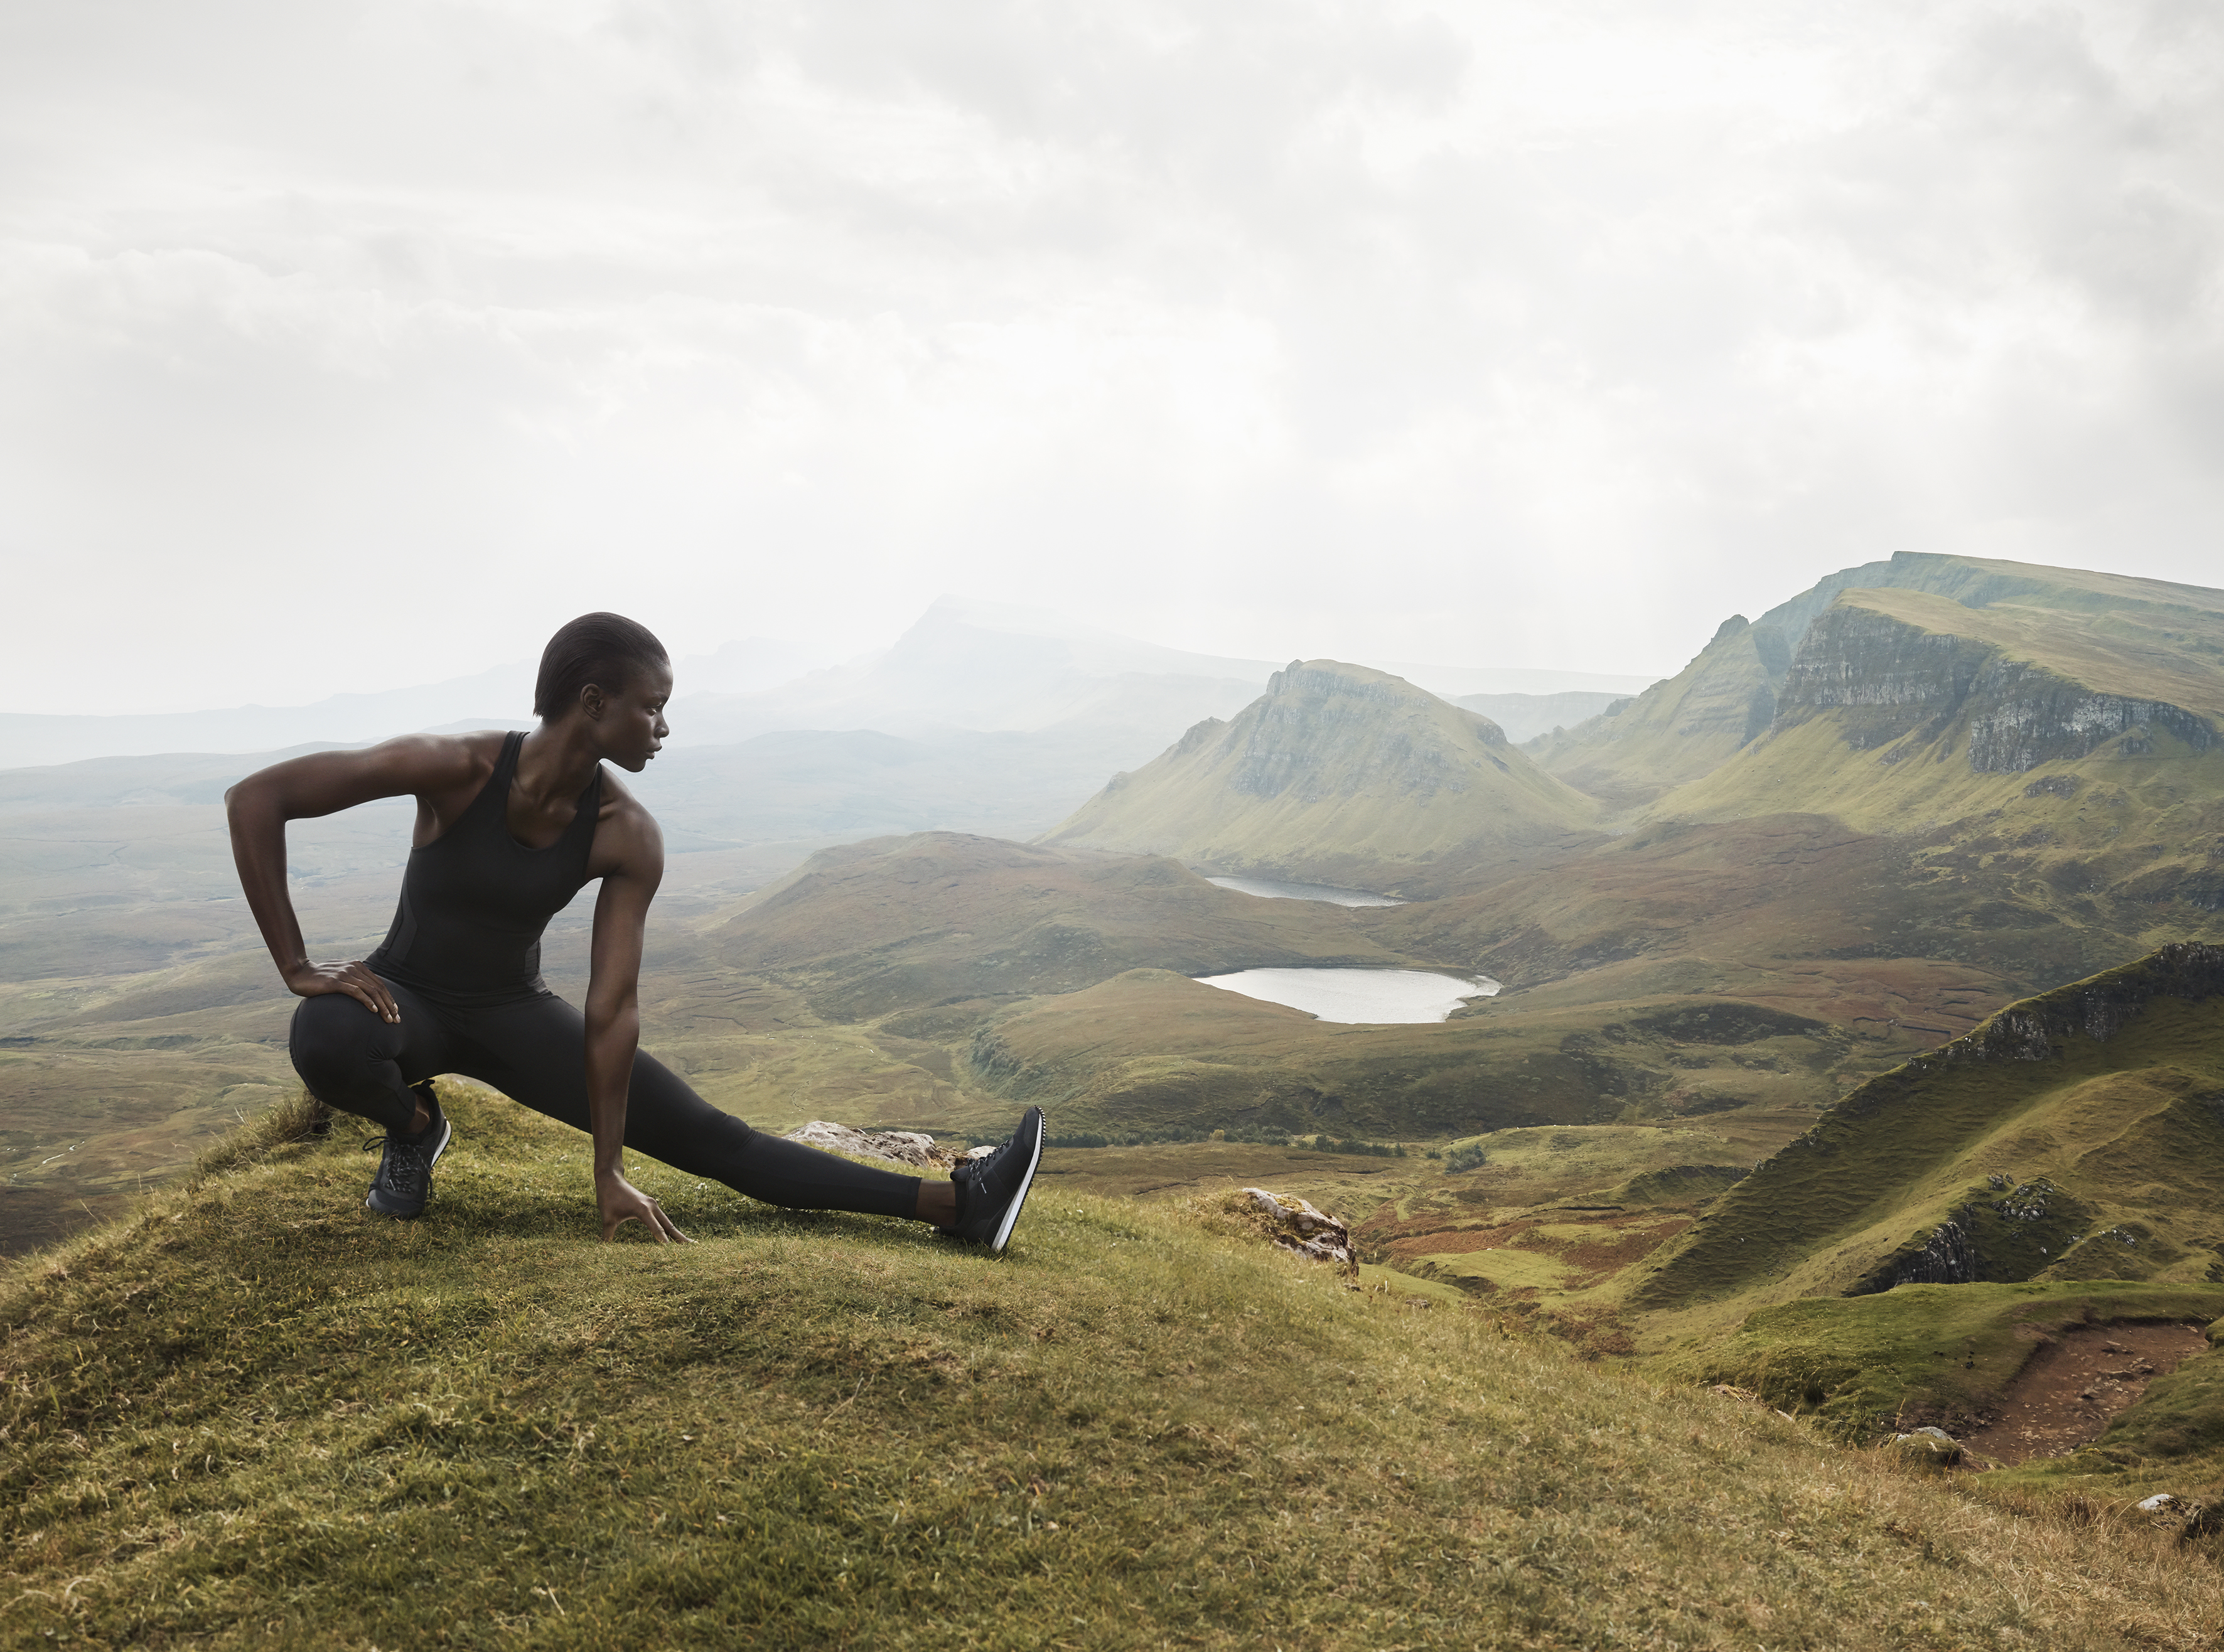 Dark-skinned woman stretching on mountain top